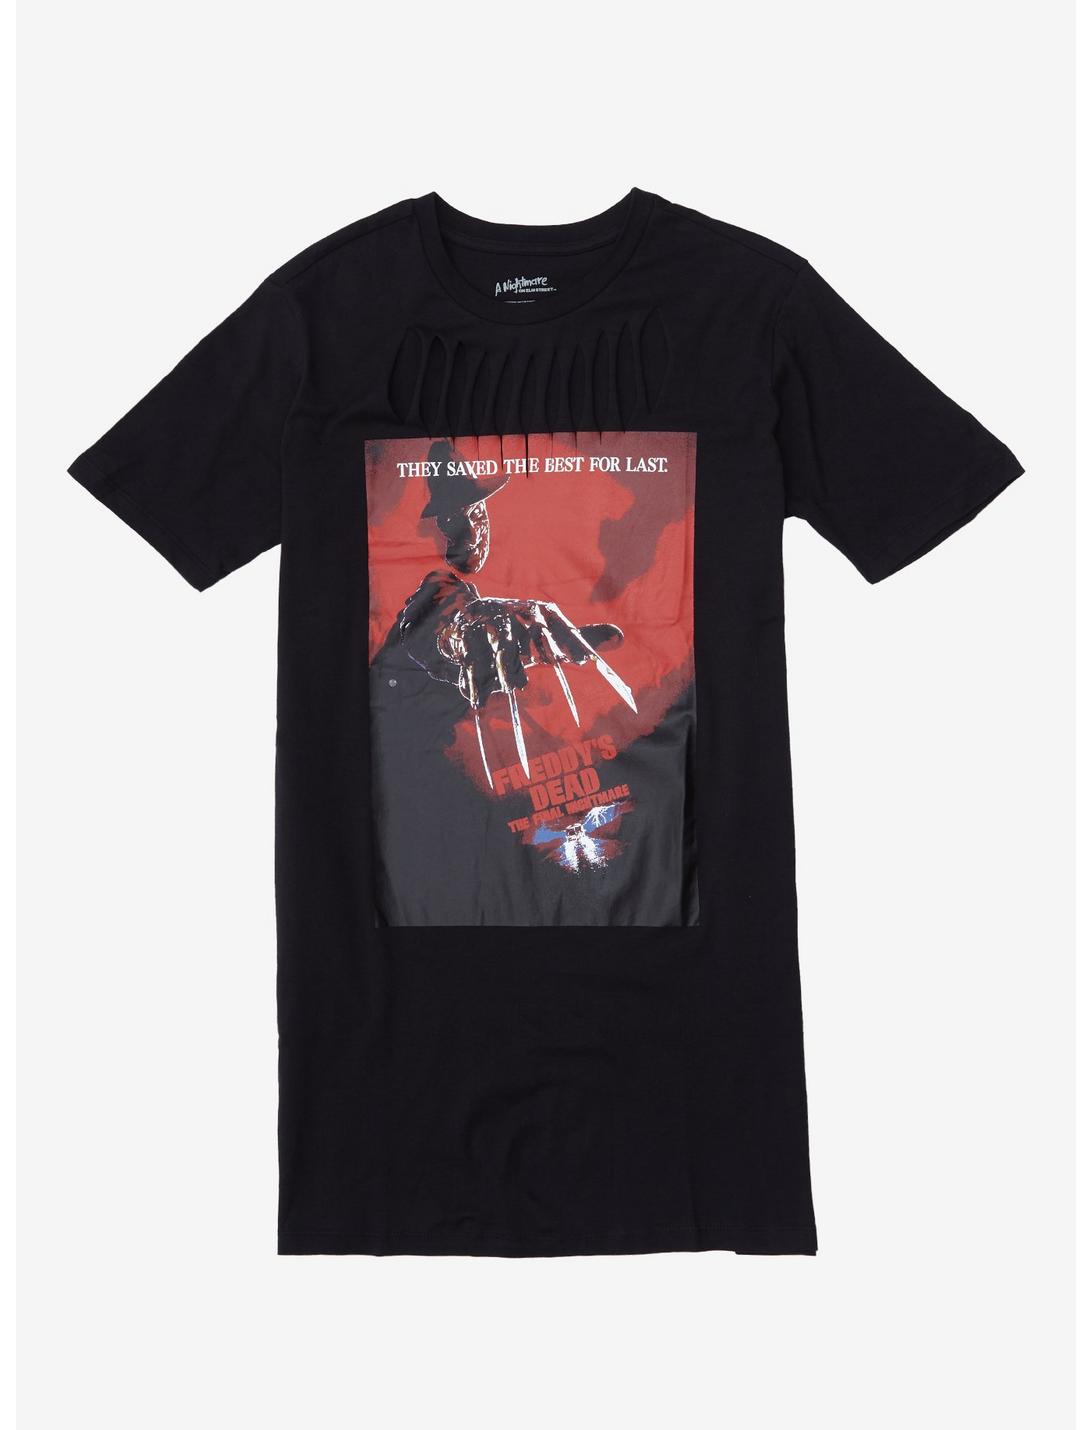 Freddy's Dead: The Final Nightmare Slashed T-Shirt Dress | Hot Topic